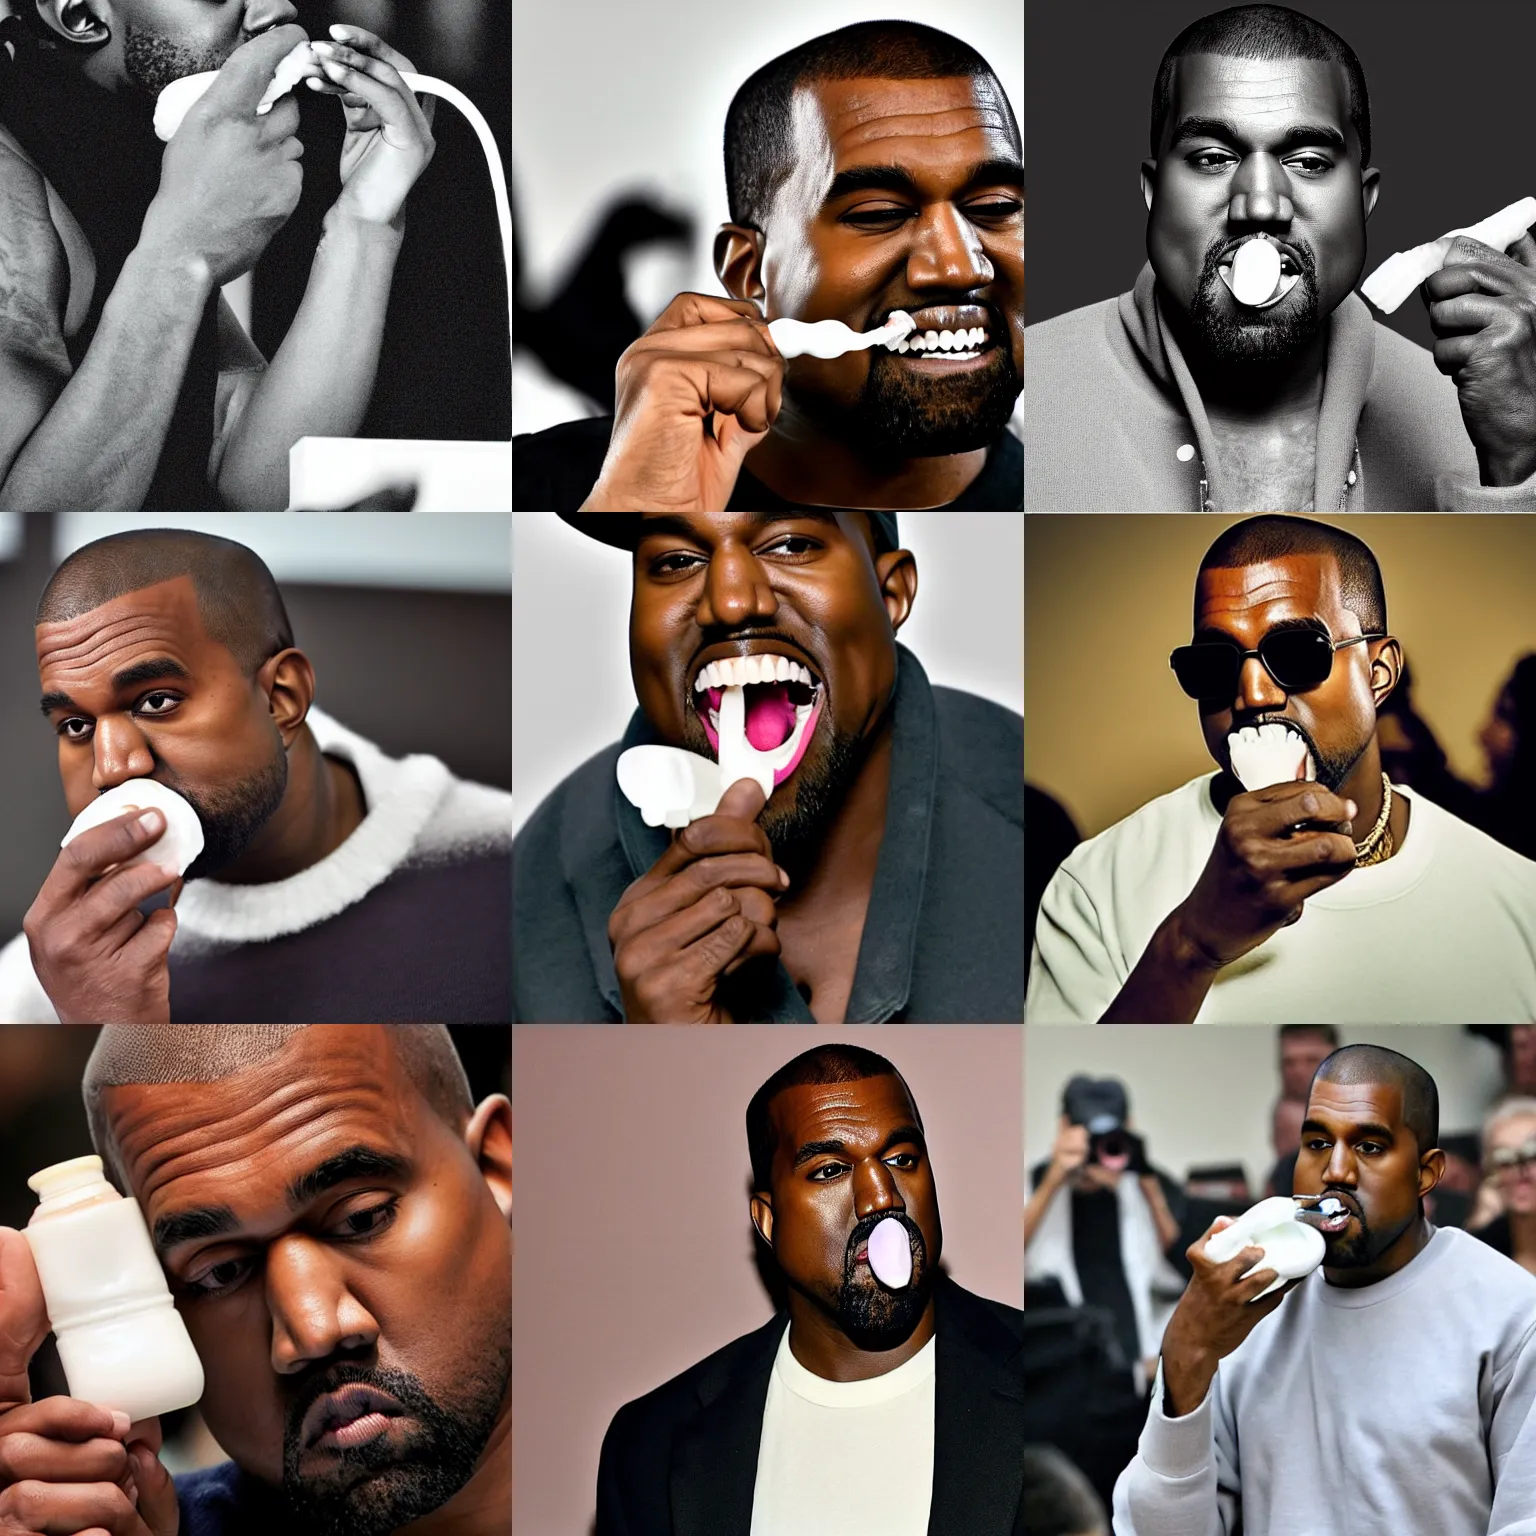 Prompt: kanye west drinking toothpaste by squeezing a tube of colgate into his mouth